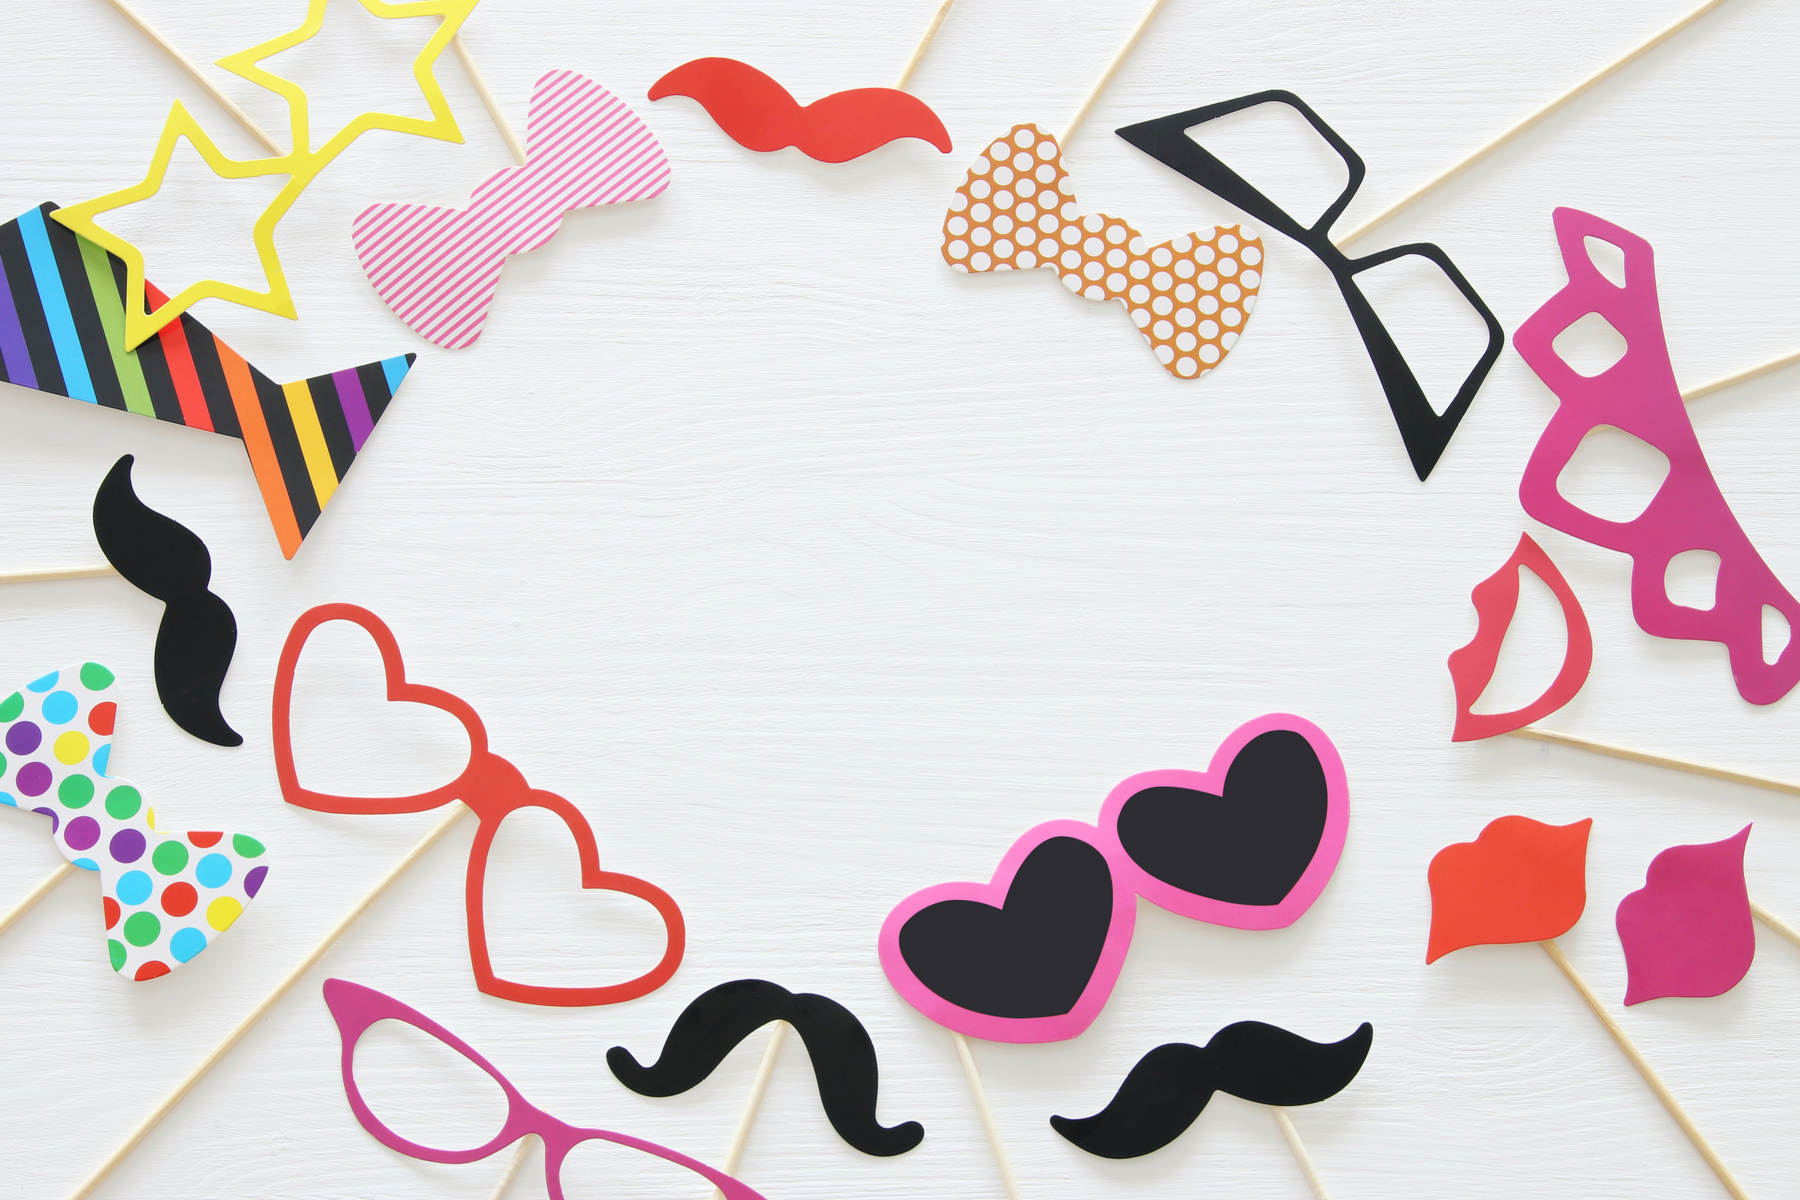 Top view image of funny and colorful photo booth props for party over white background.